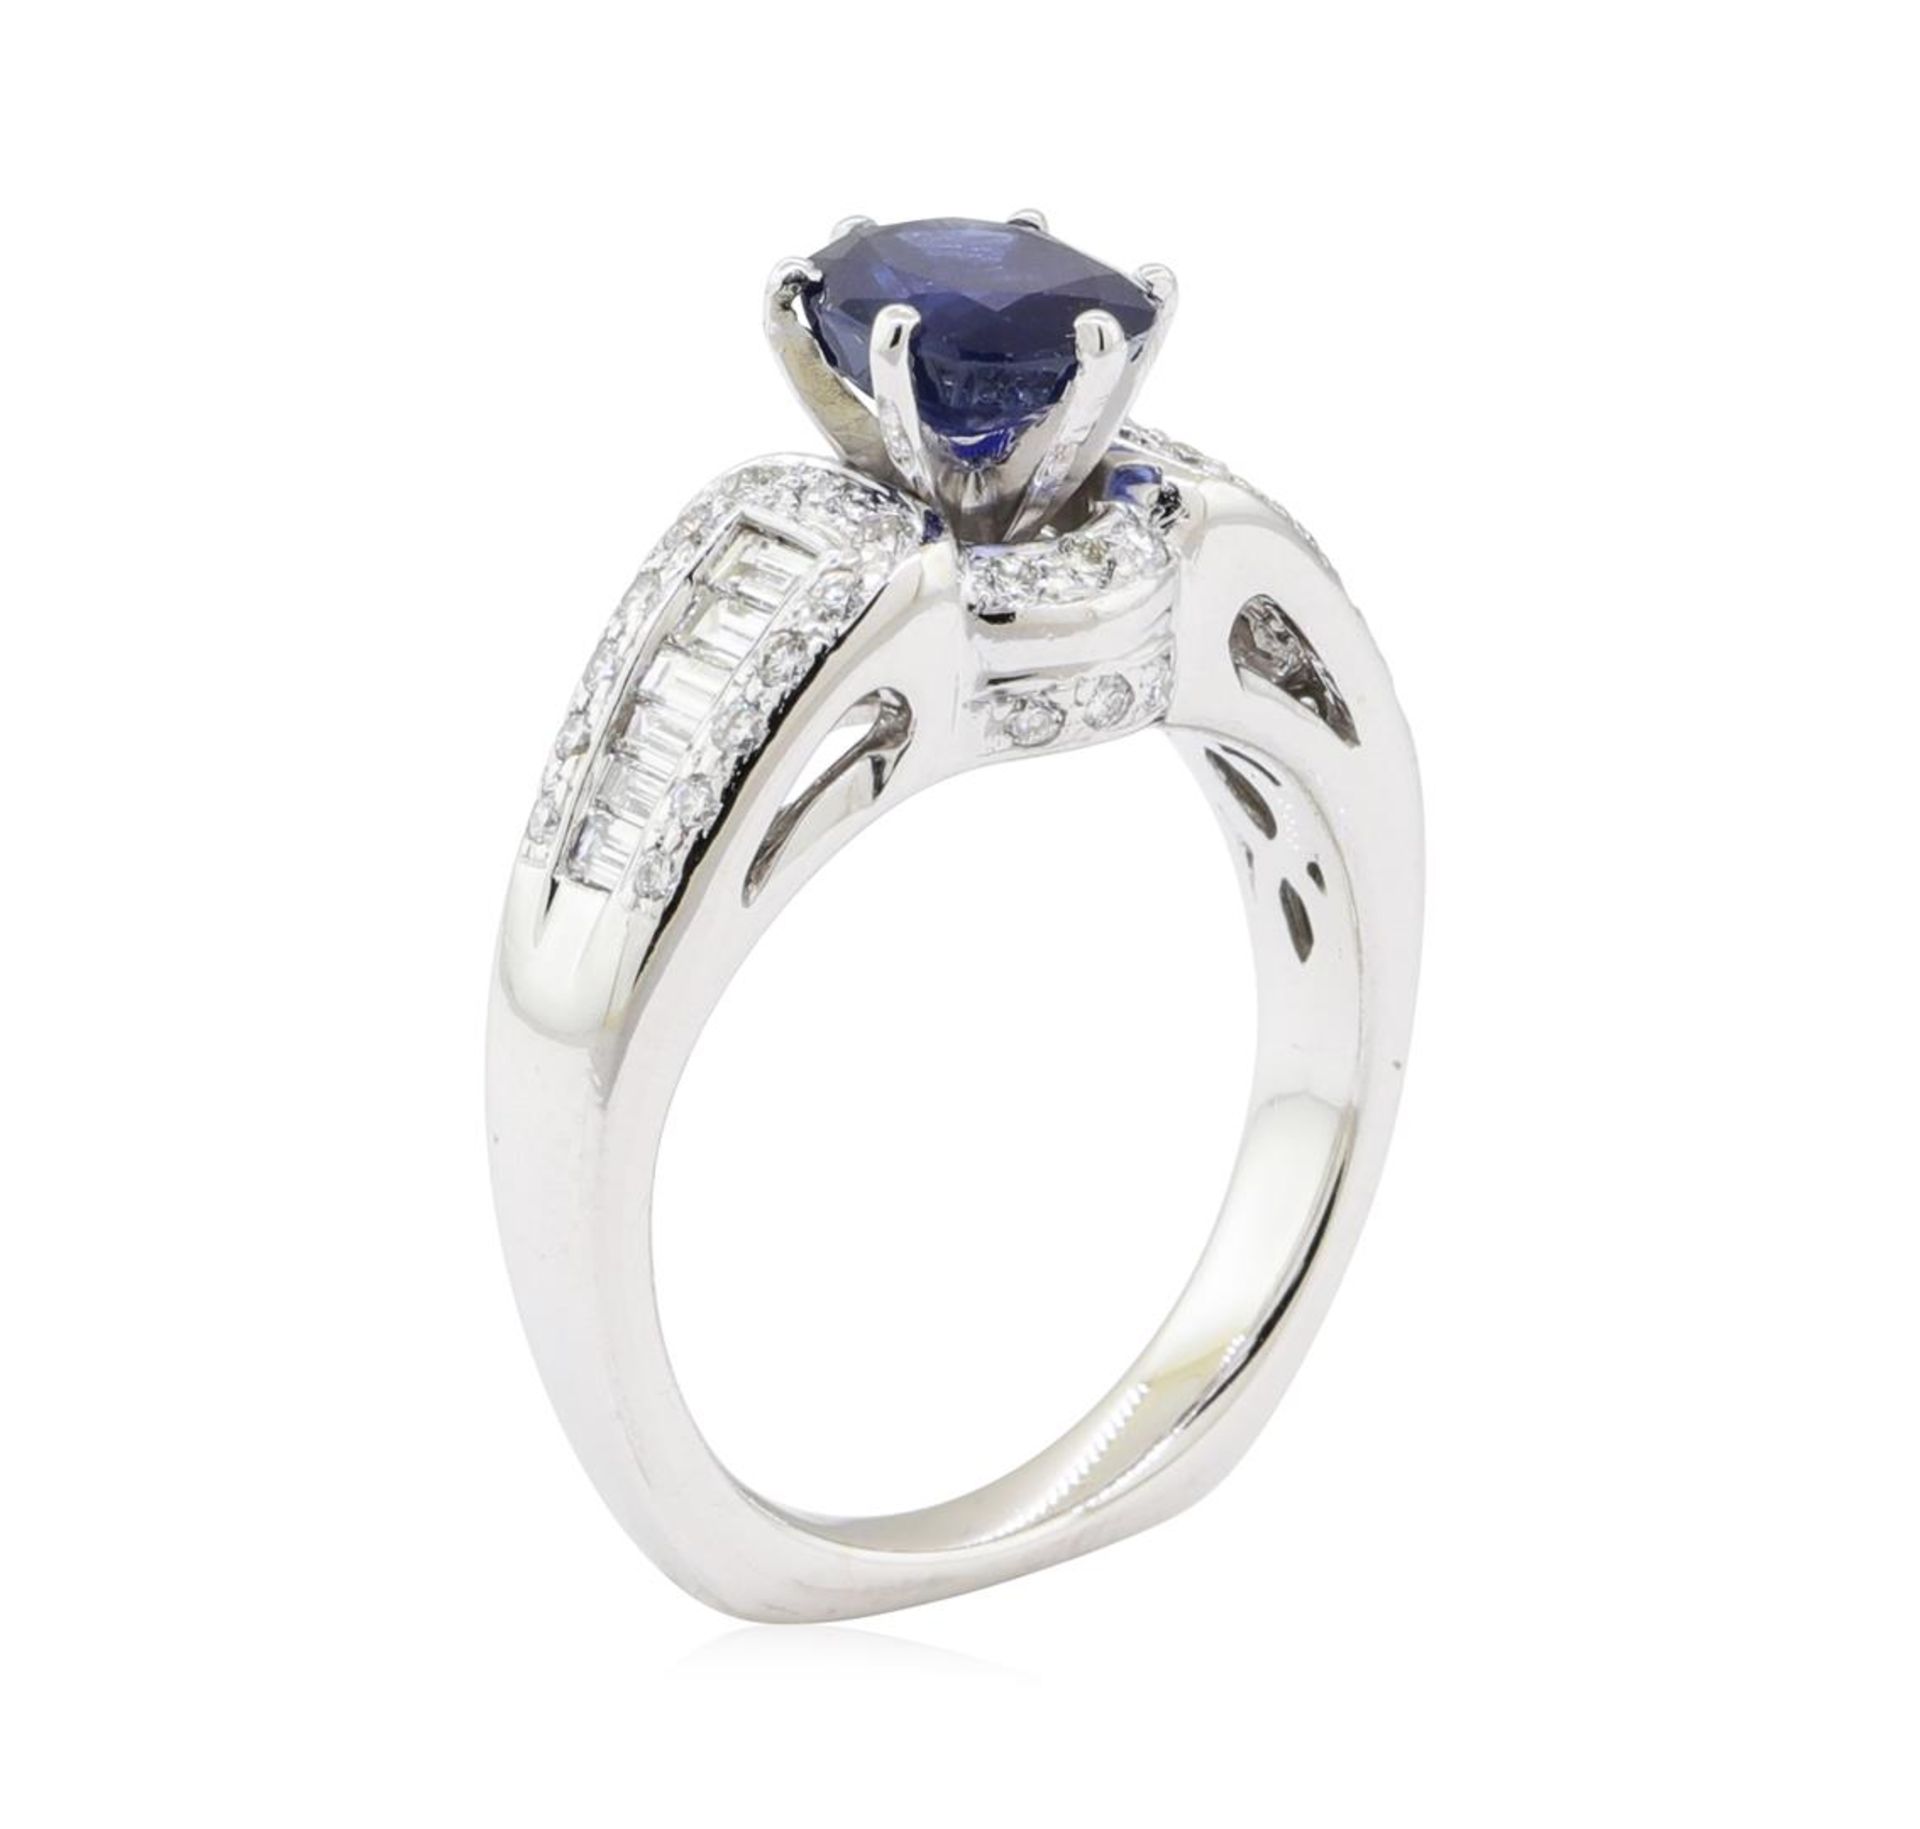 2.01 ctw Sapphire and Diamond Ring - 14KT White Gold - Image 8 of 10